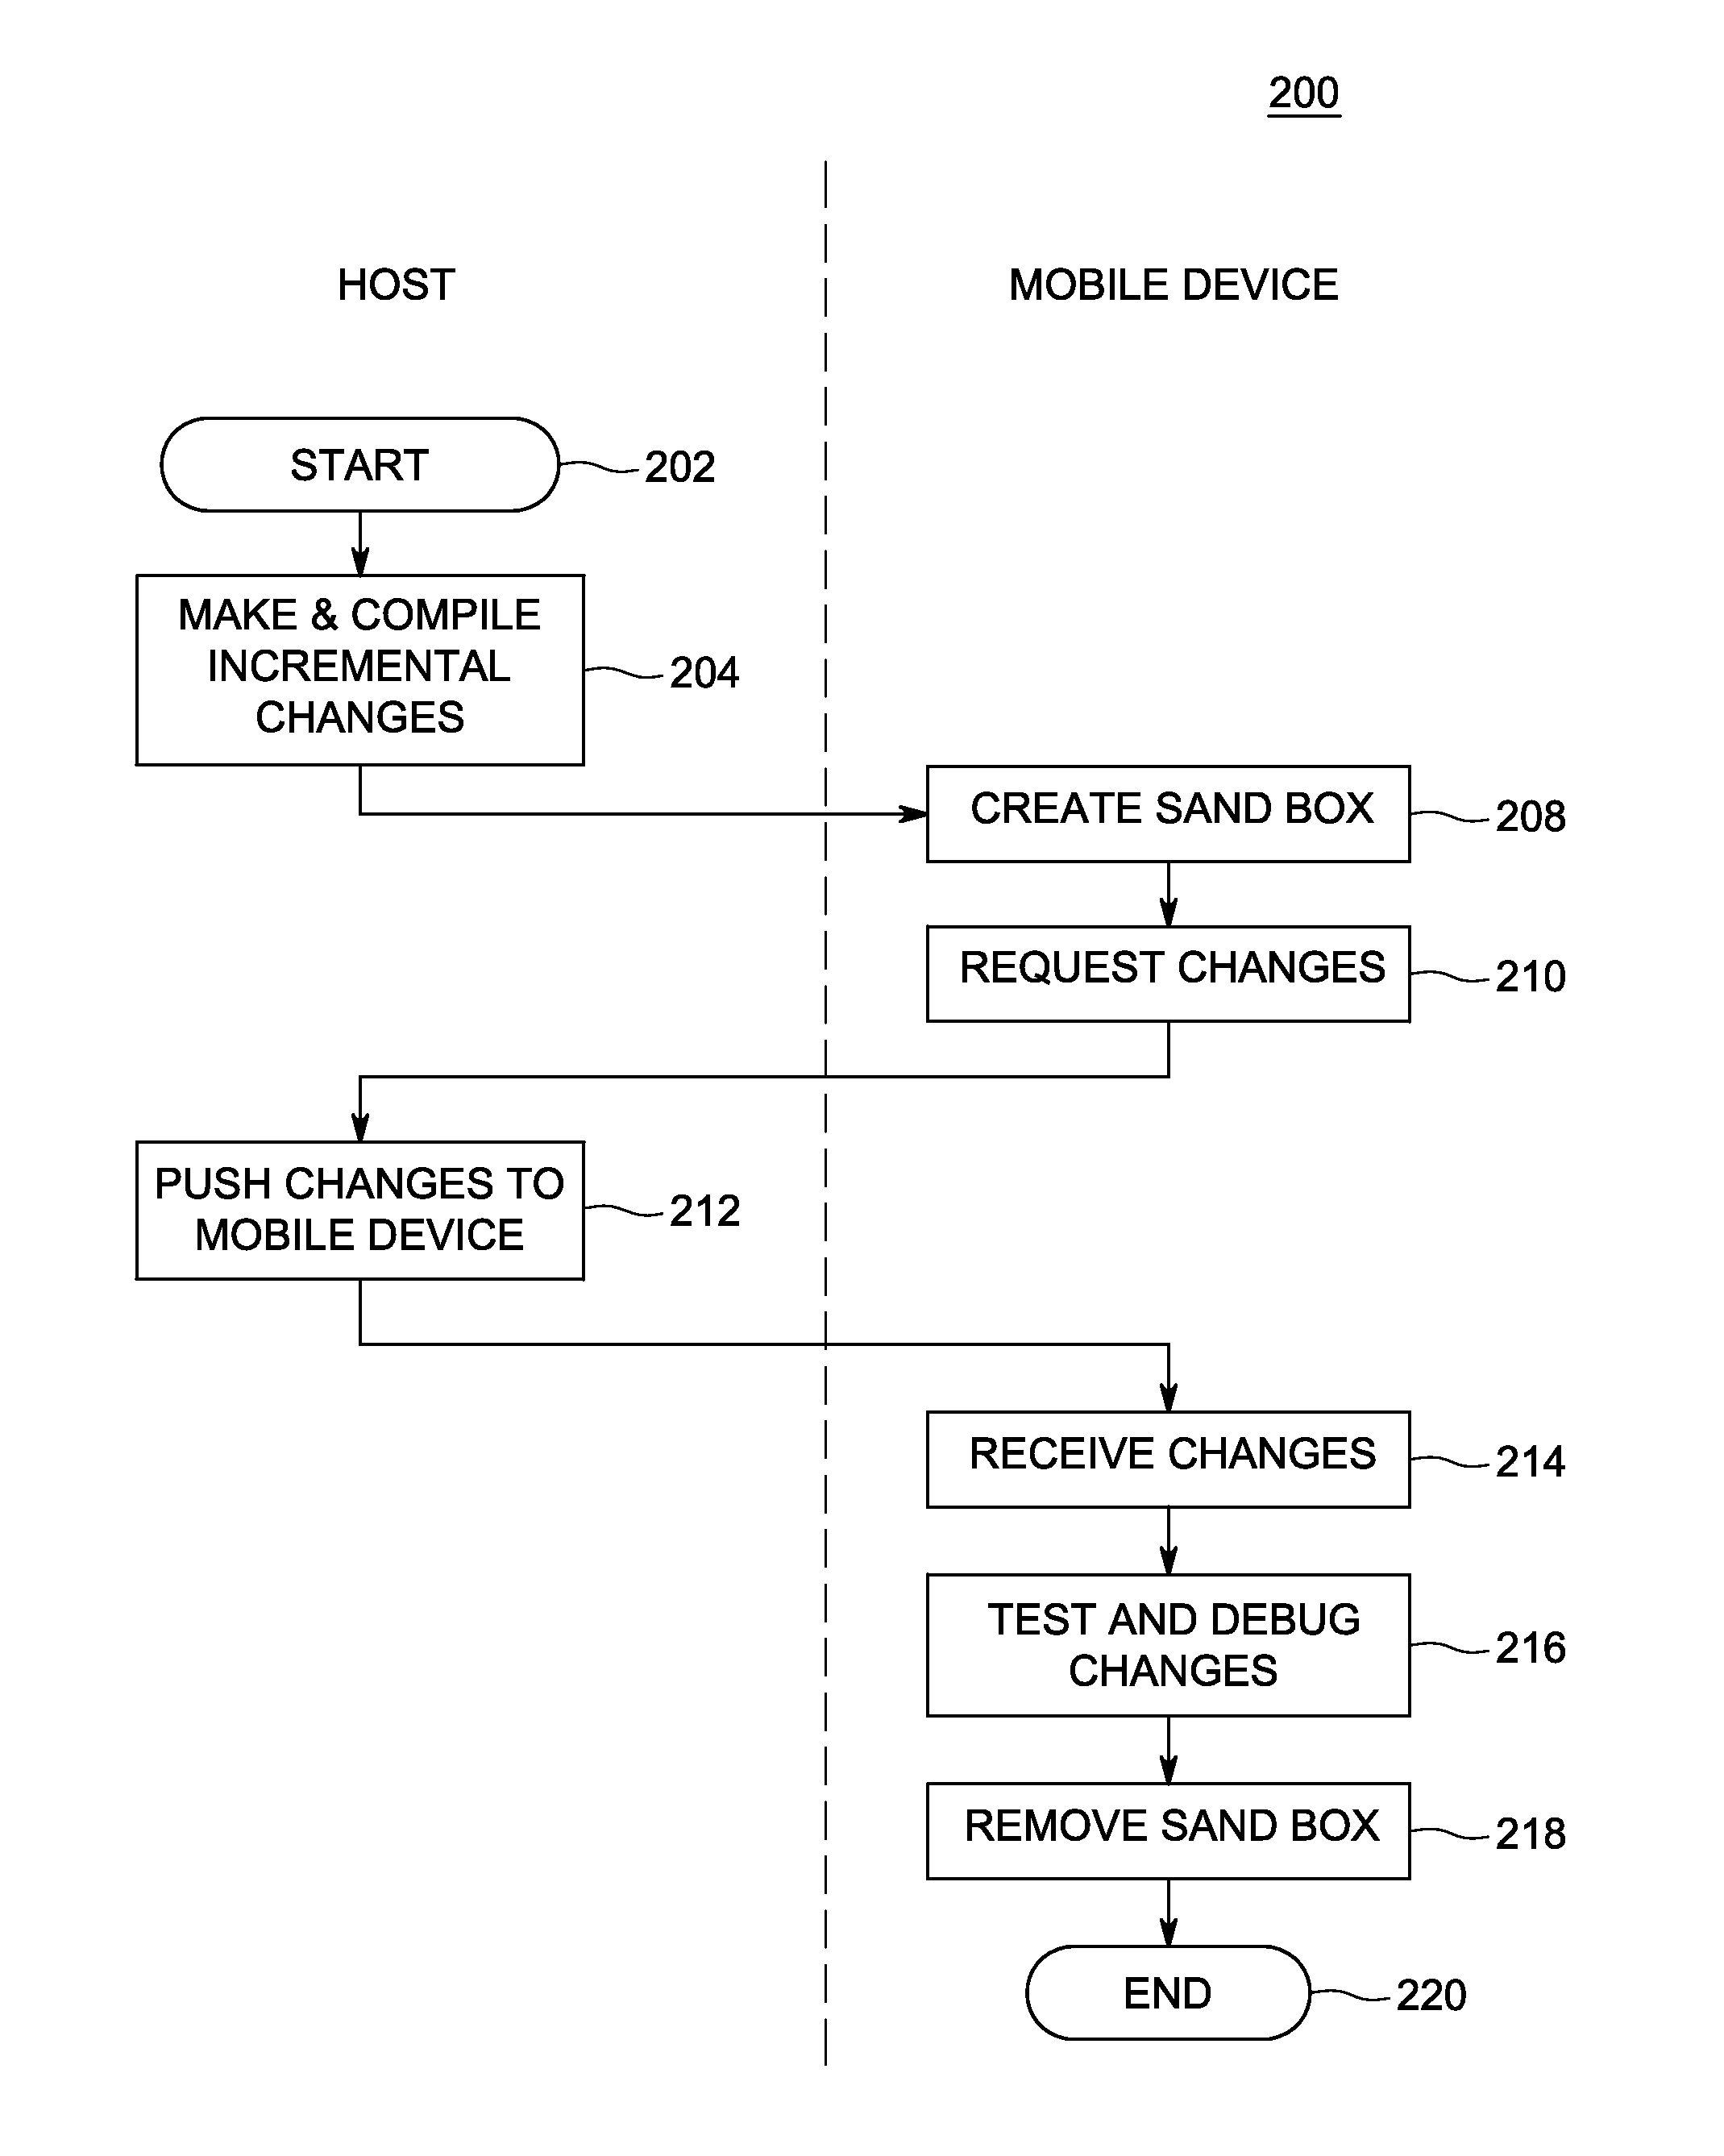 Method and apparatus for mobile application development and testing that avoids repackaging and reinstallation